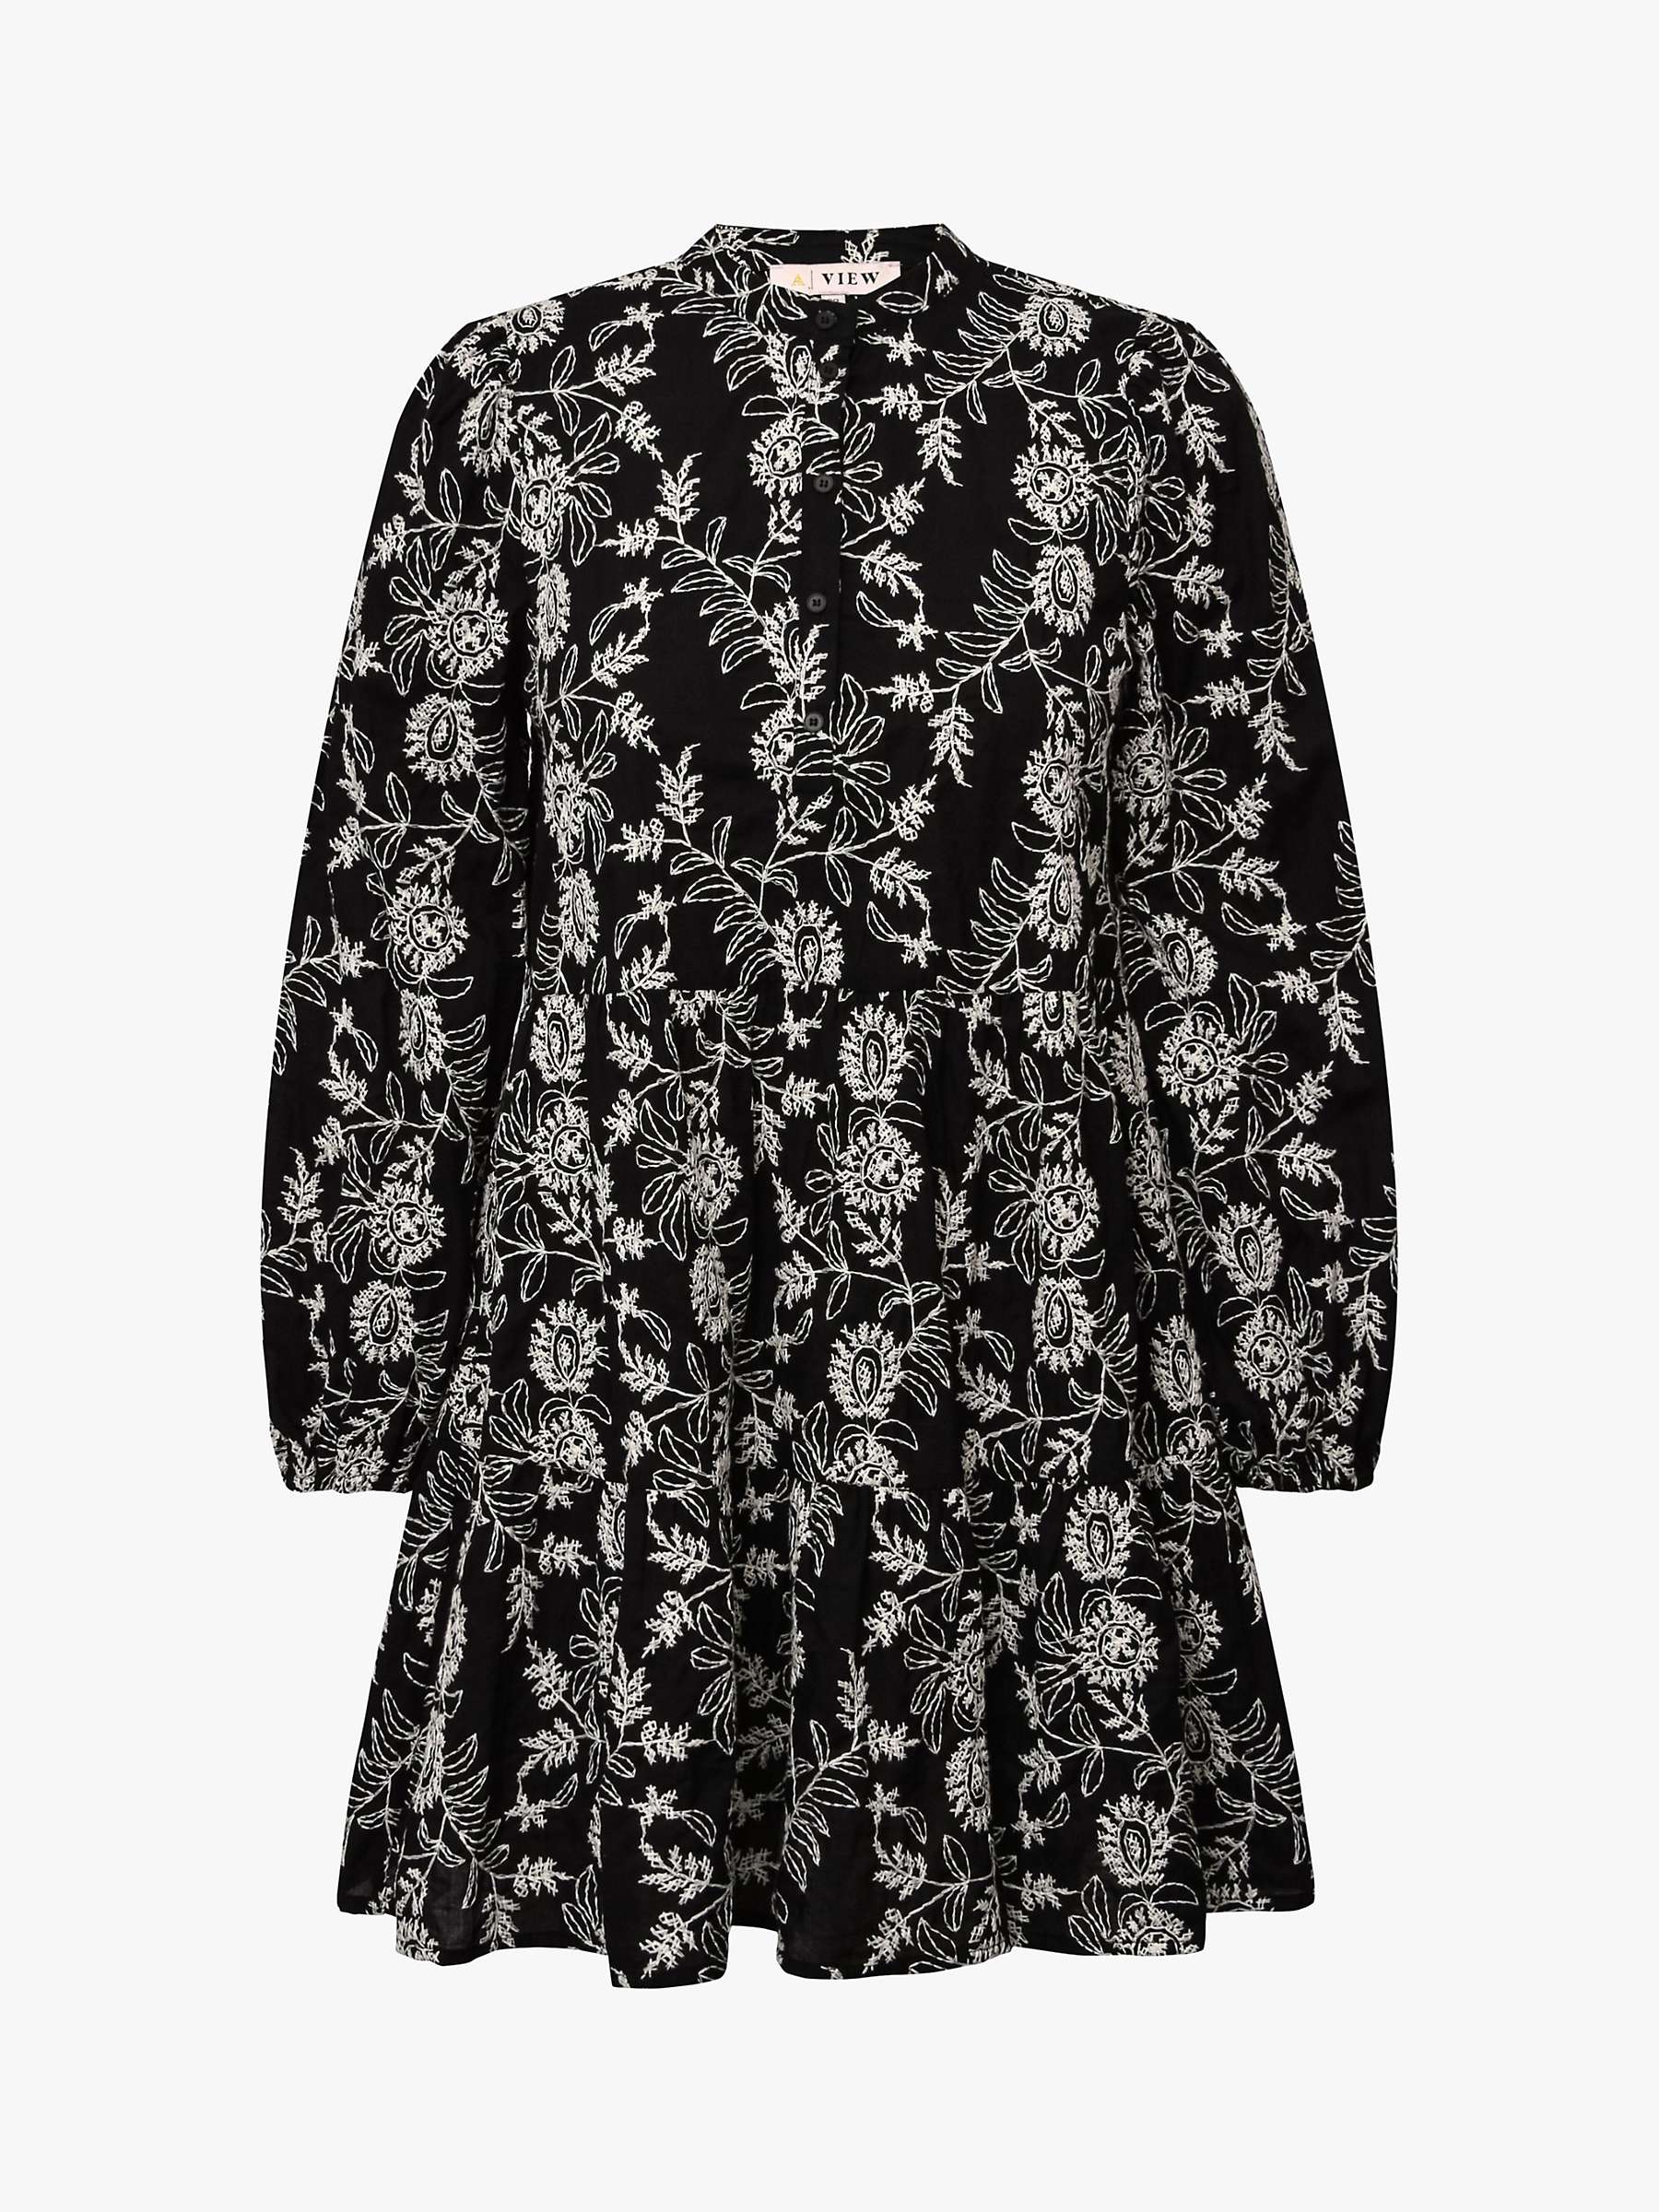 Buy A-VIEW Embroidered Dress, Black/Off White Online at johnlewis.com